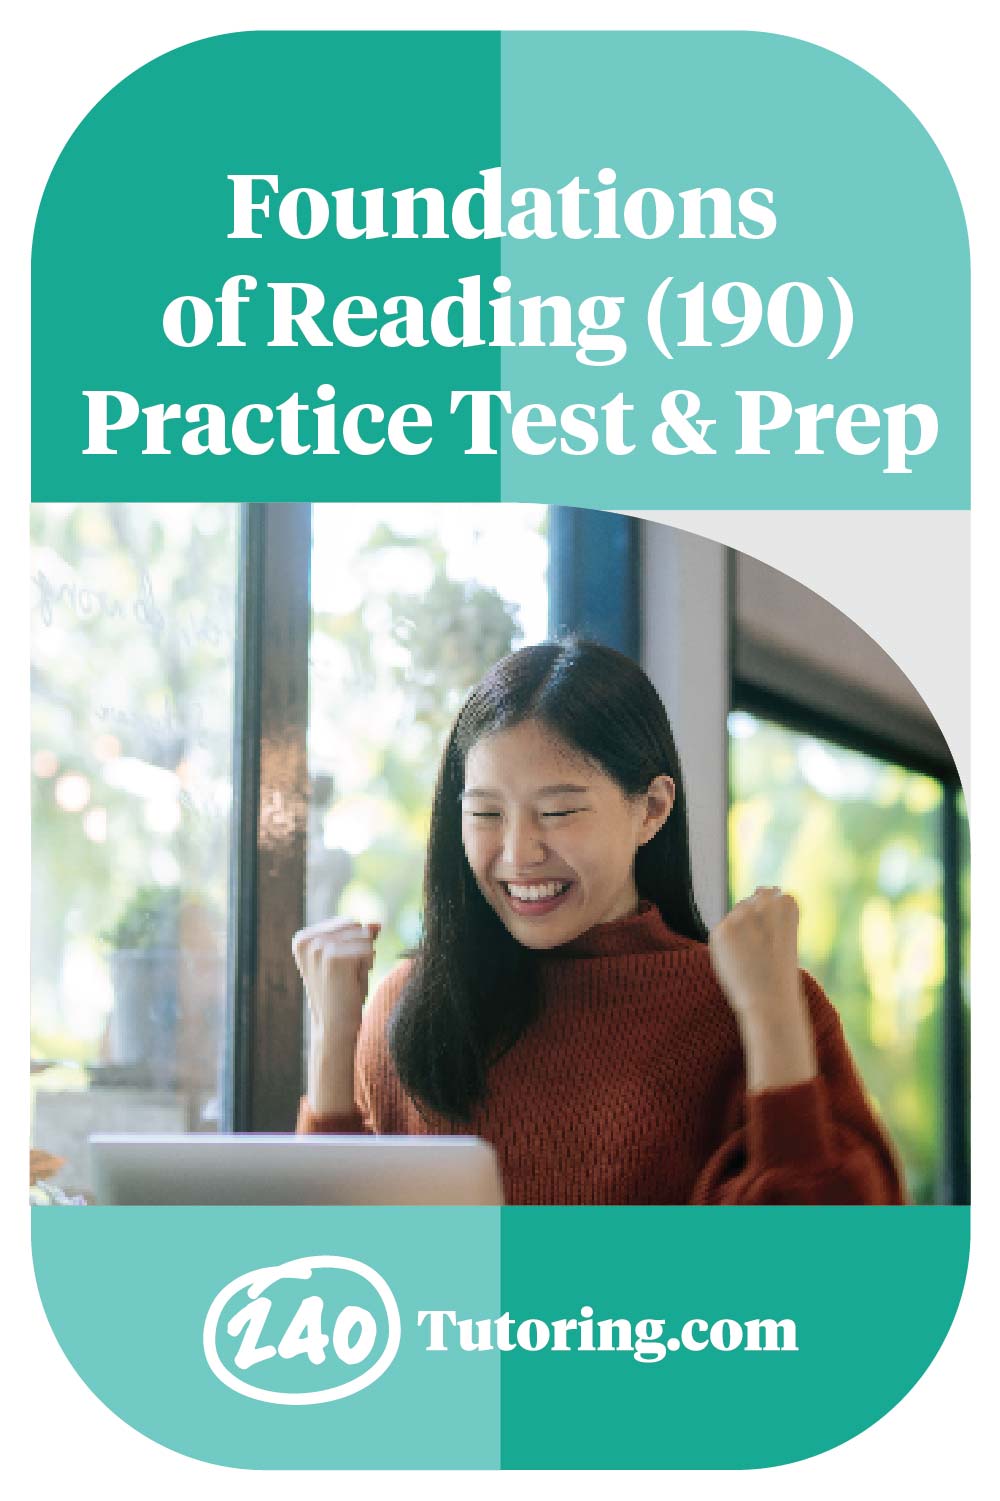 Foundations of Reading 190 Practice Test